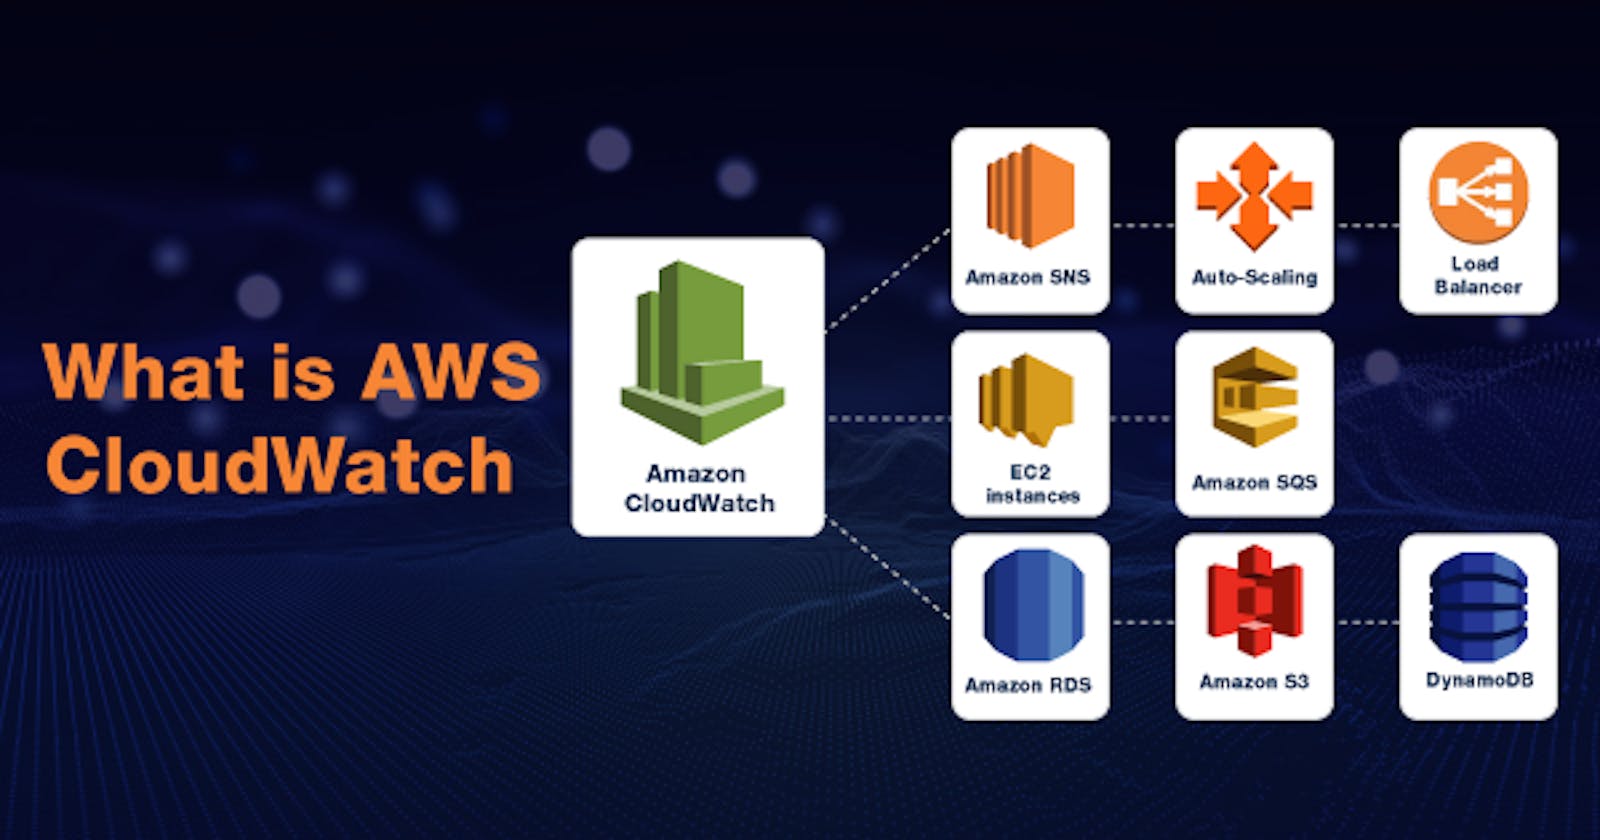 Set up CloudWatch alarms and SNS in AWS